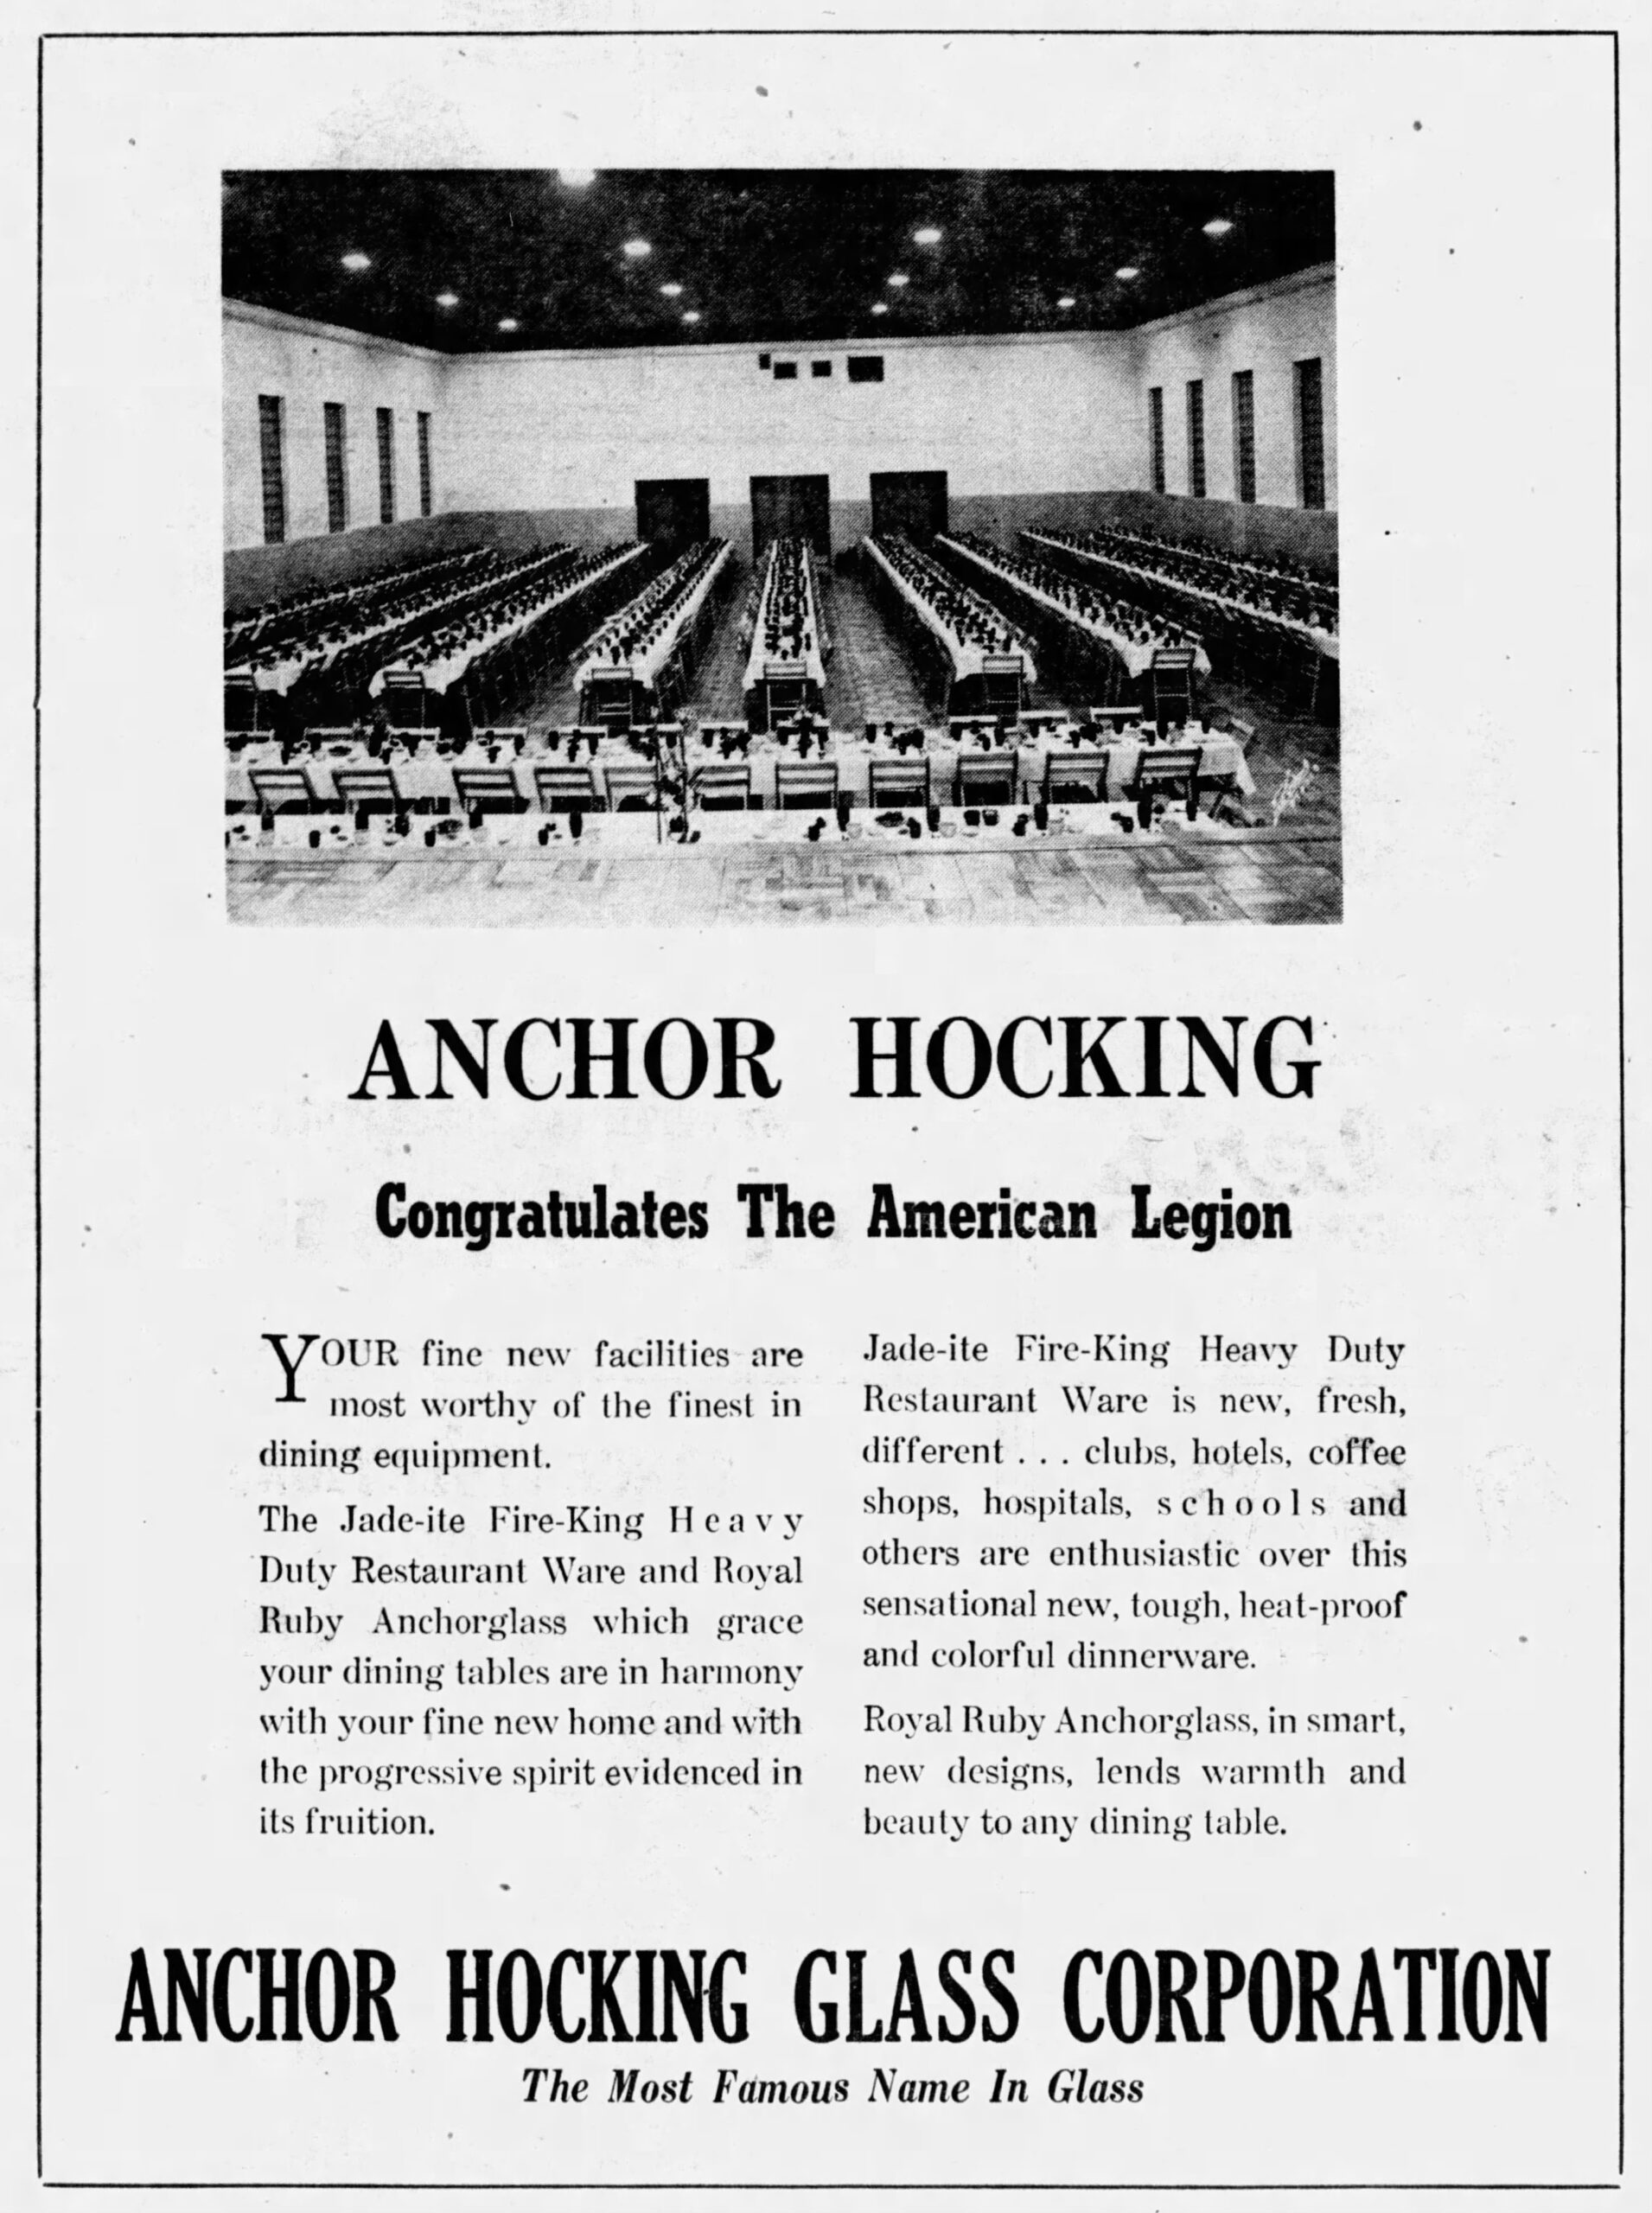 An Anchor Hocking ad from 1949 announces The American Legion will be outfitted with Fire-King Restaurant Ware and Royal Ruby Anchorglass.